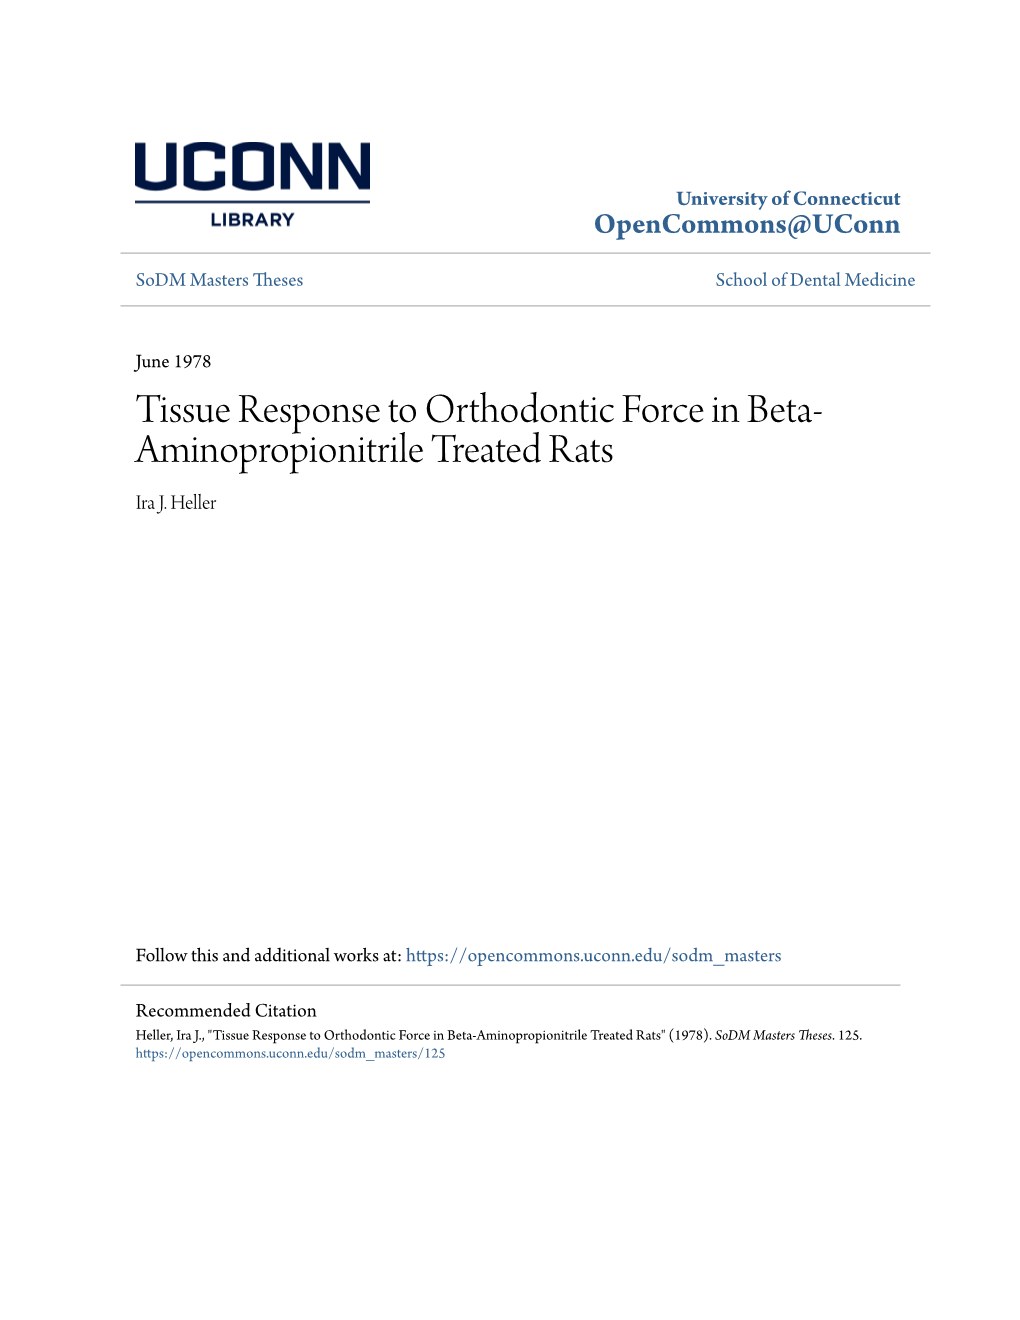 Tissue Response to Orthodontic Force in Beta-Aminopropionitrile Treated Rats" (1978)